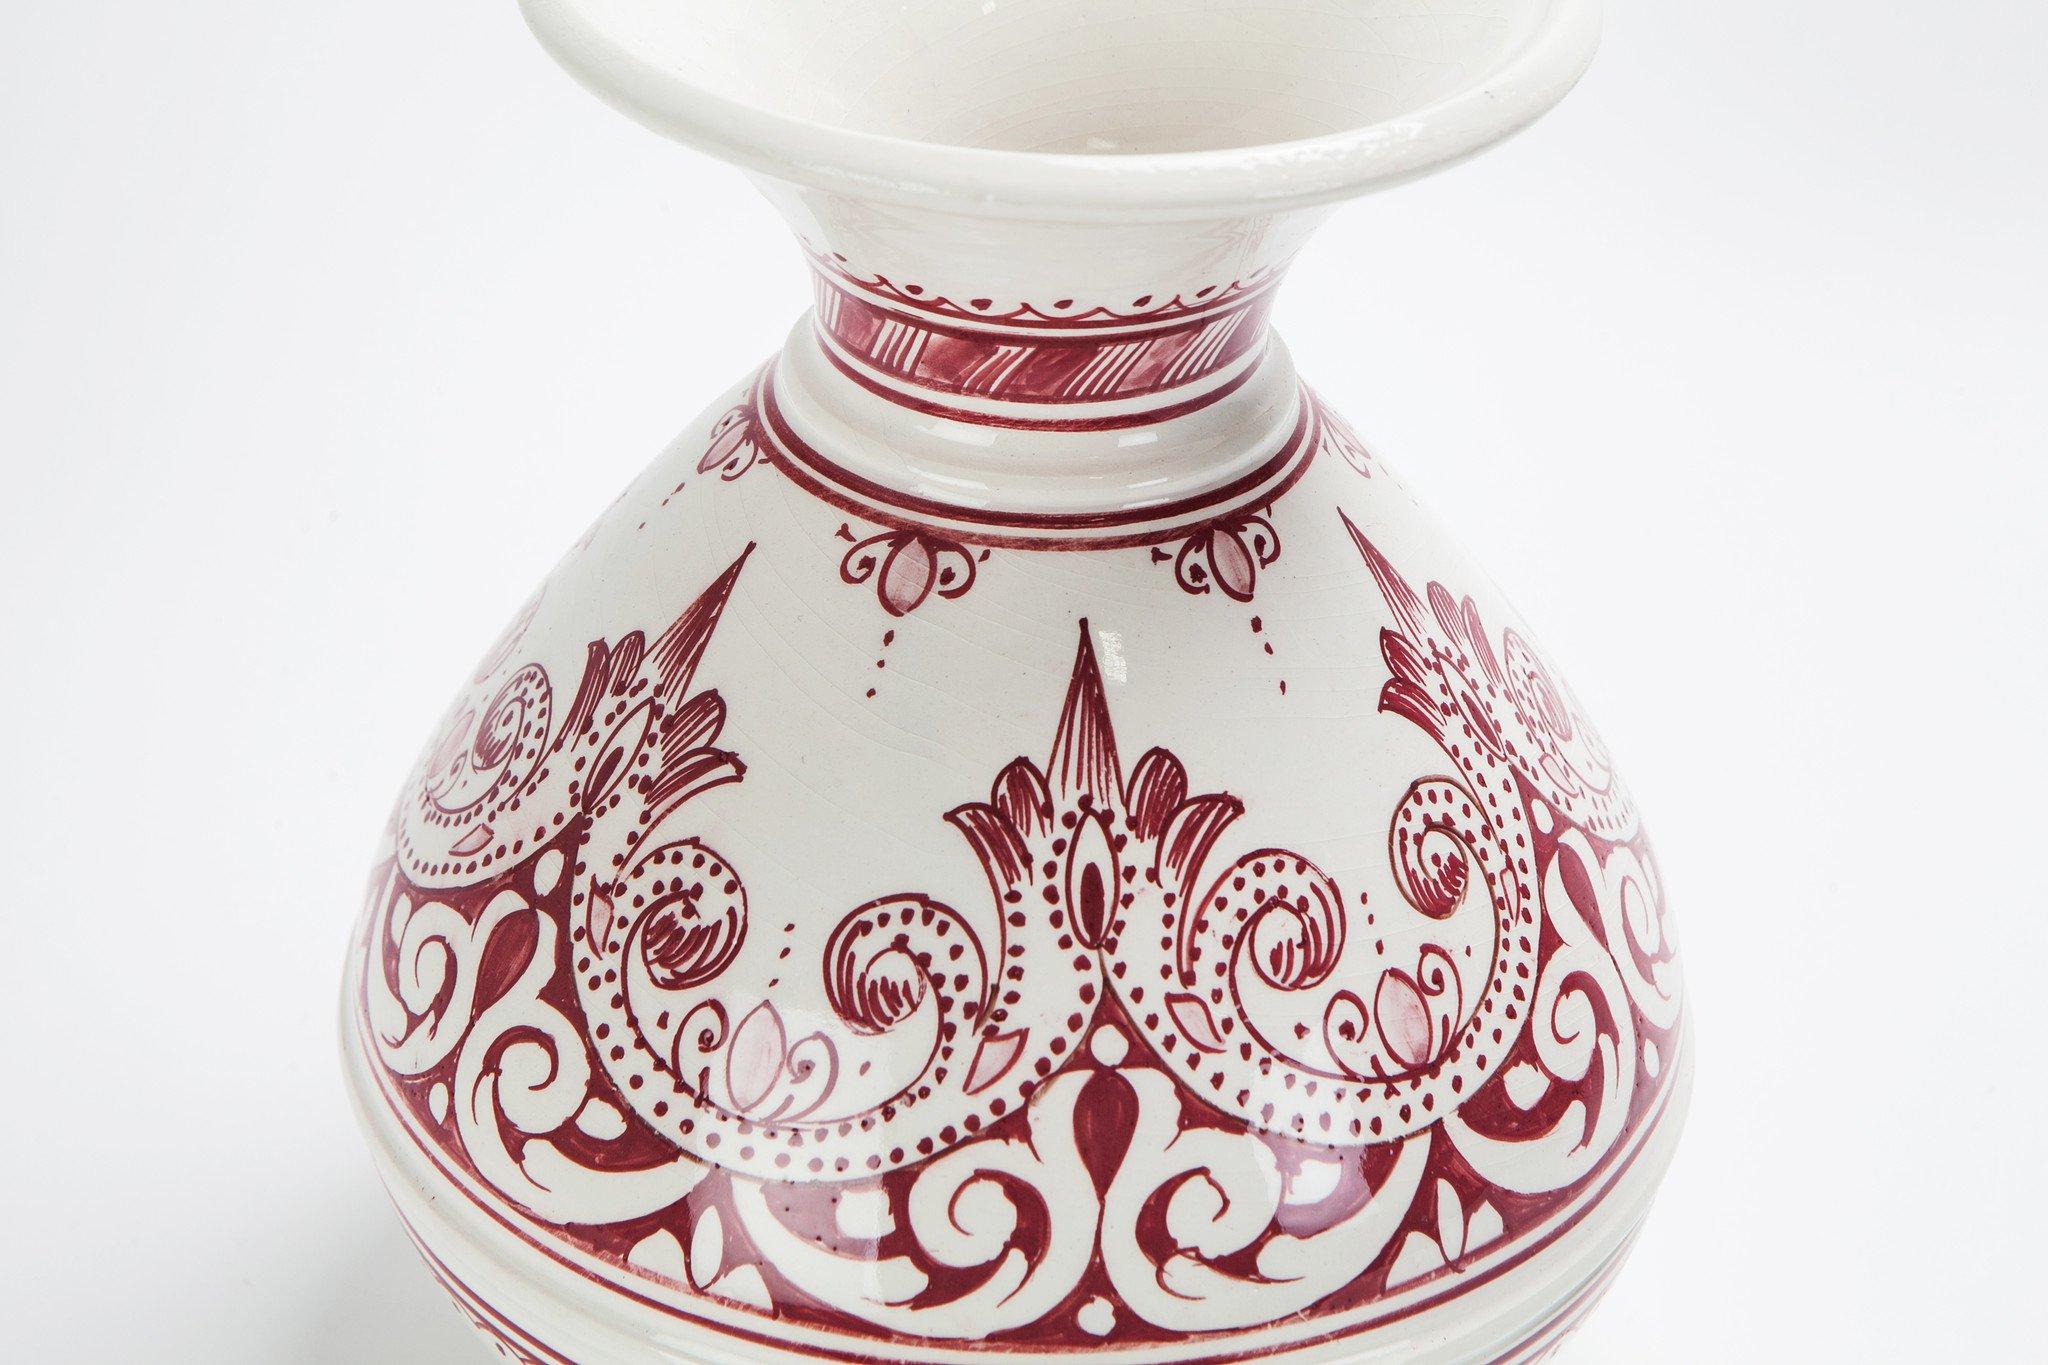 A vintage handcrafted Moroccan burgundy and white ceramic vase, featuring intricately swirling hand painted designs, this vase provides a touch of exotic sophistication that will accentuate any room. It has been created by master artisans working